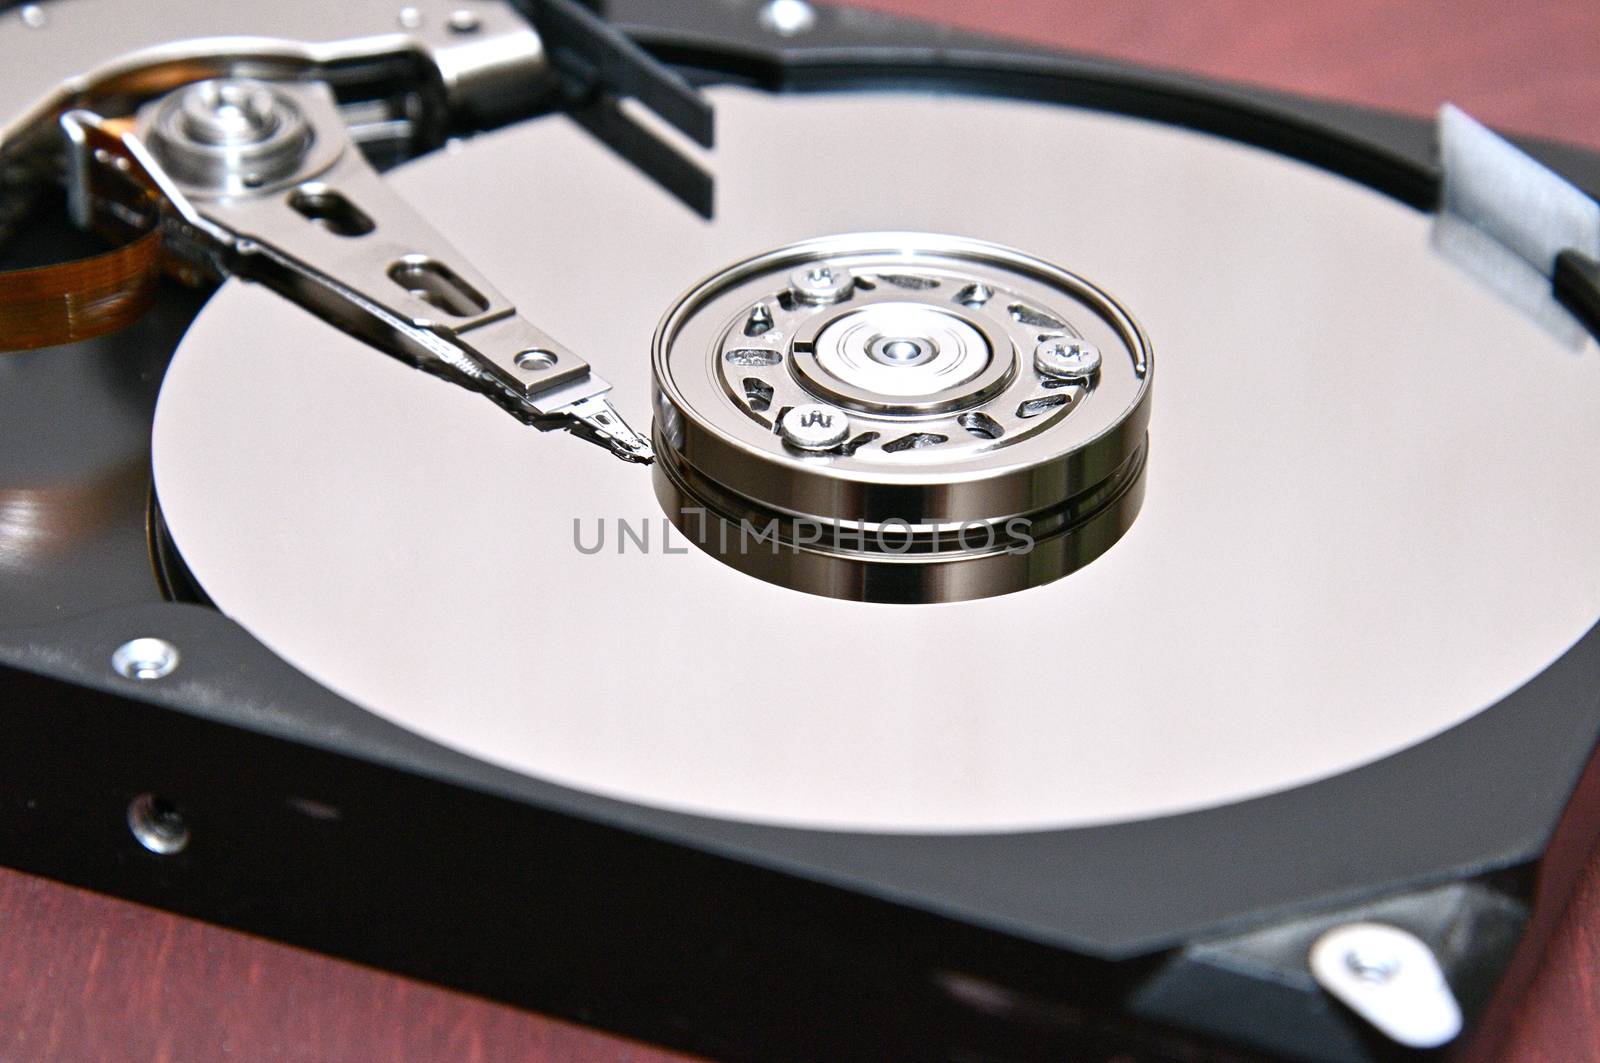 Internal parts of a hard disk on an isolated braun,wood background.